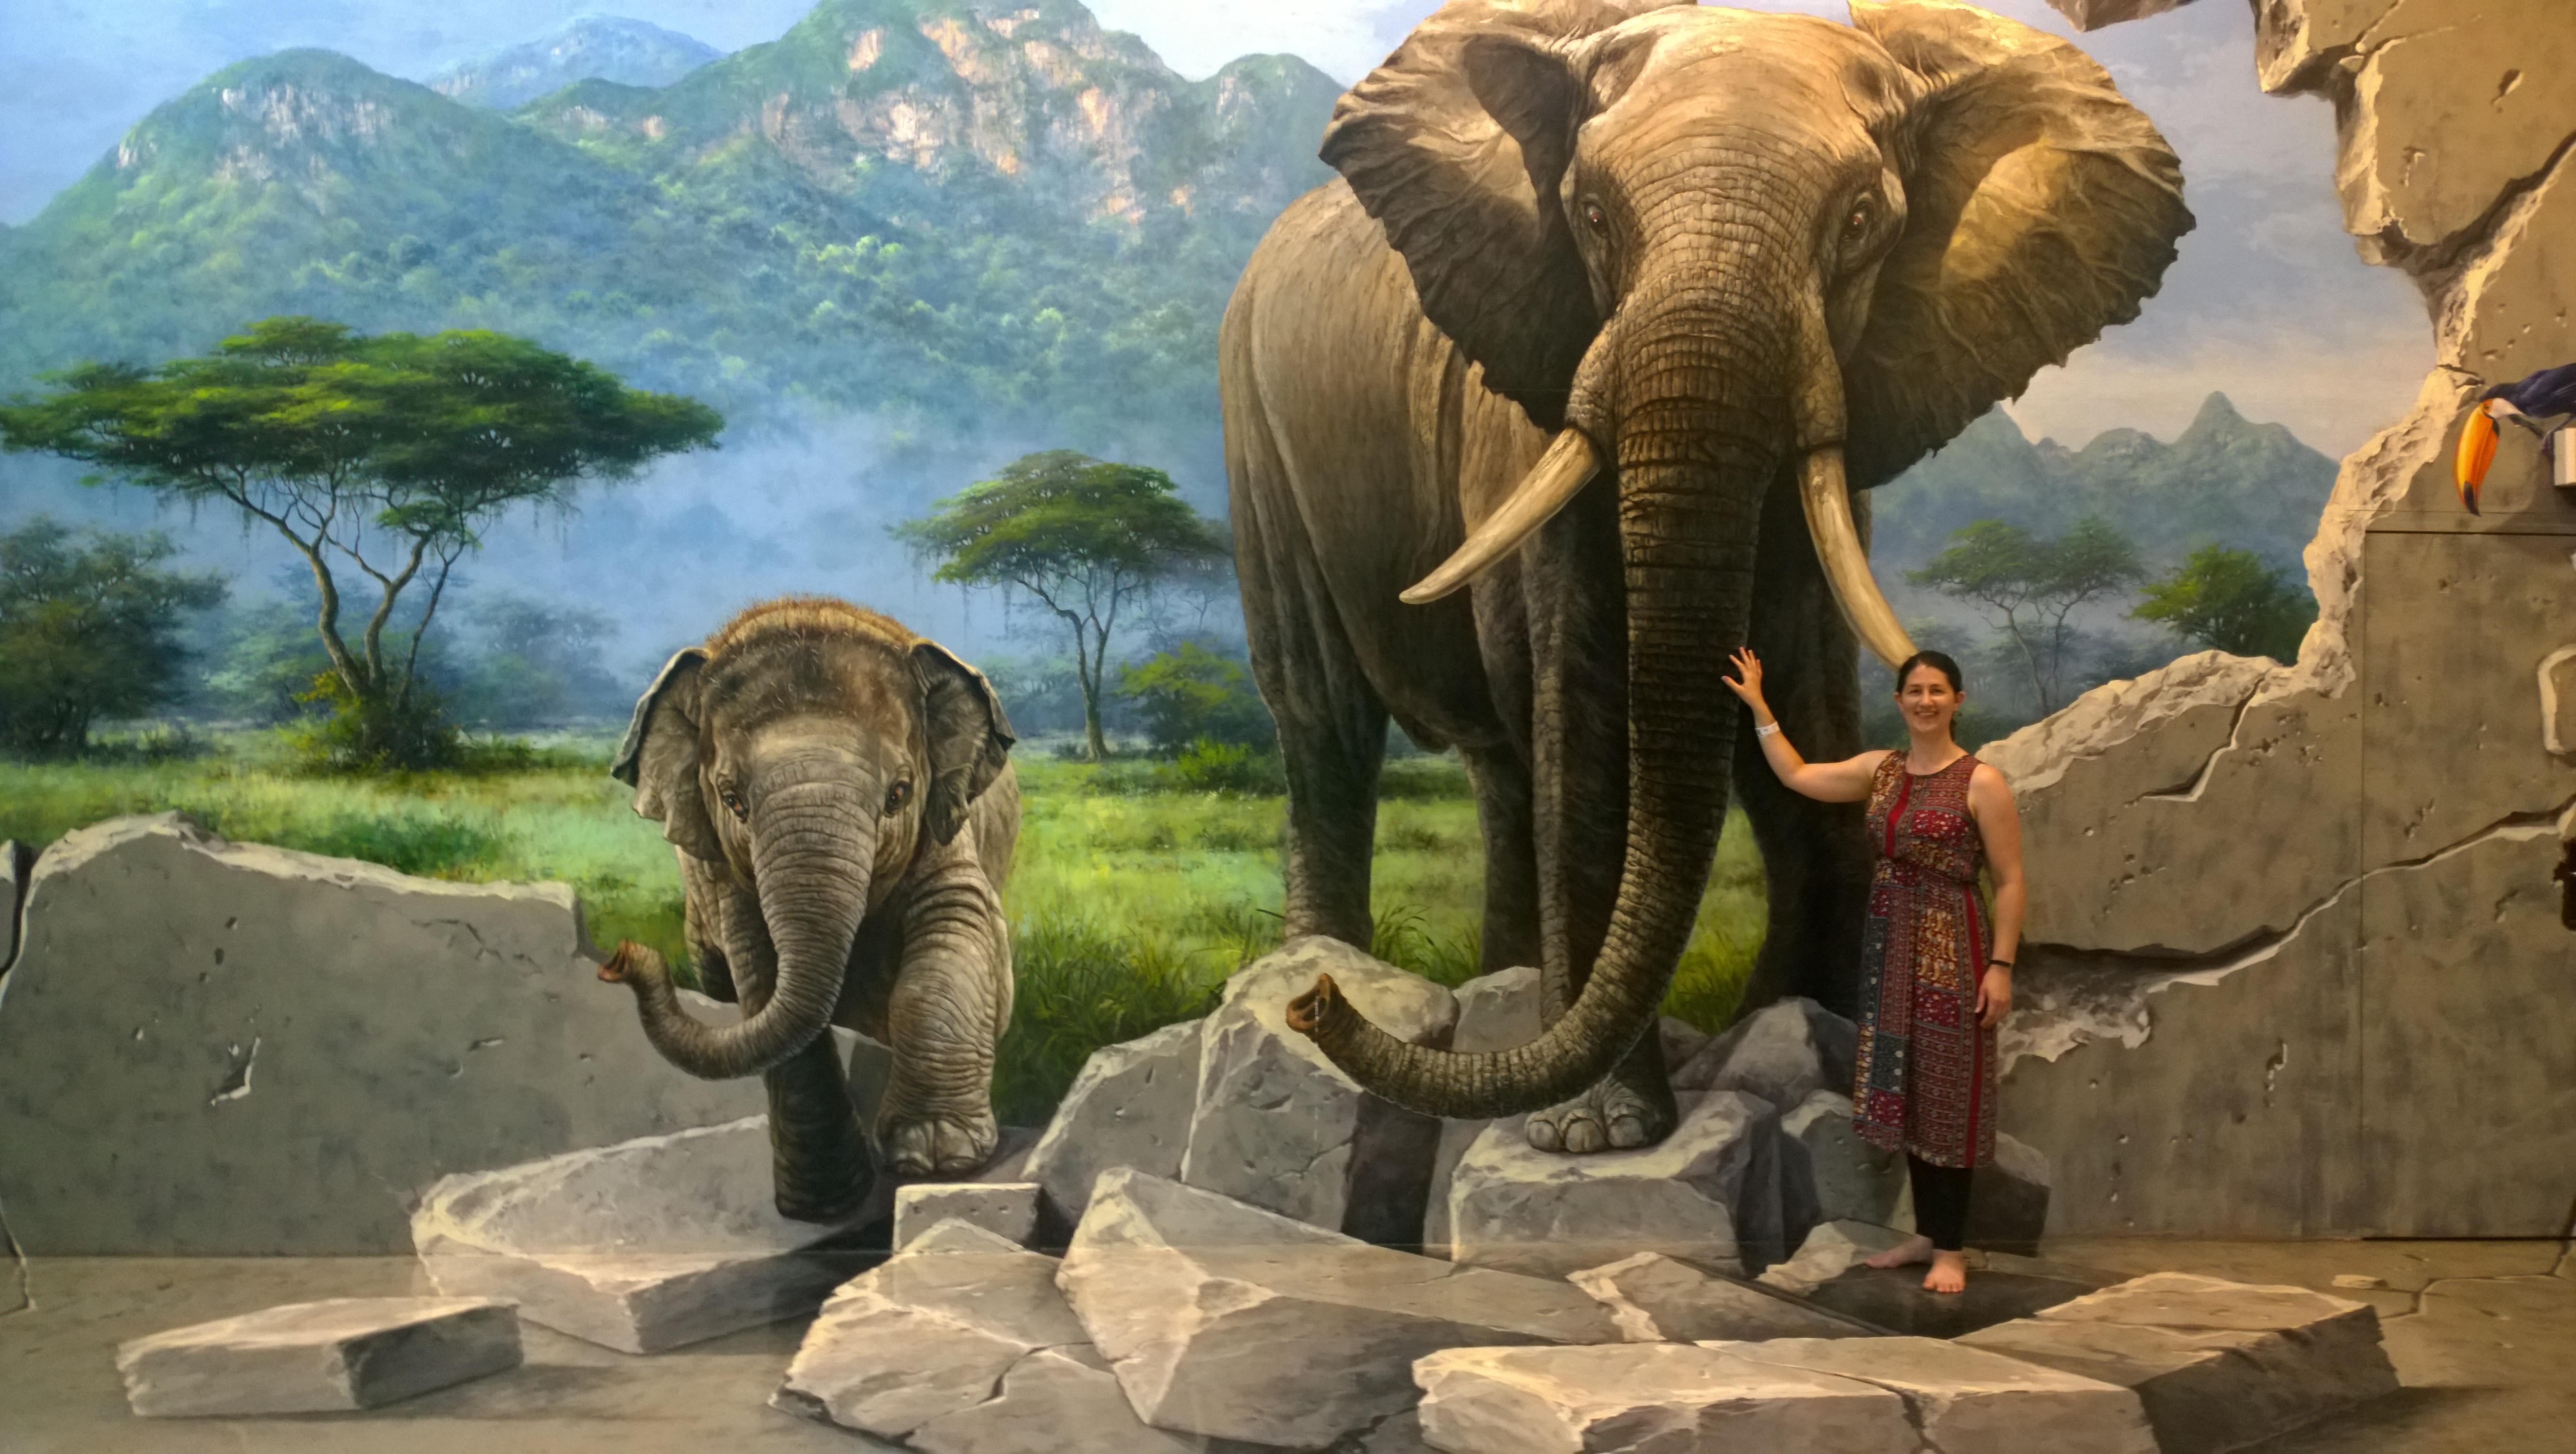 3D art museum Langkawi- mom and baby elephant